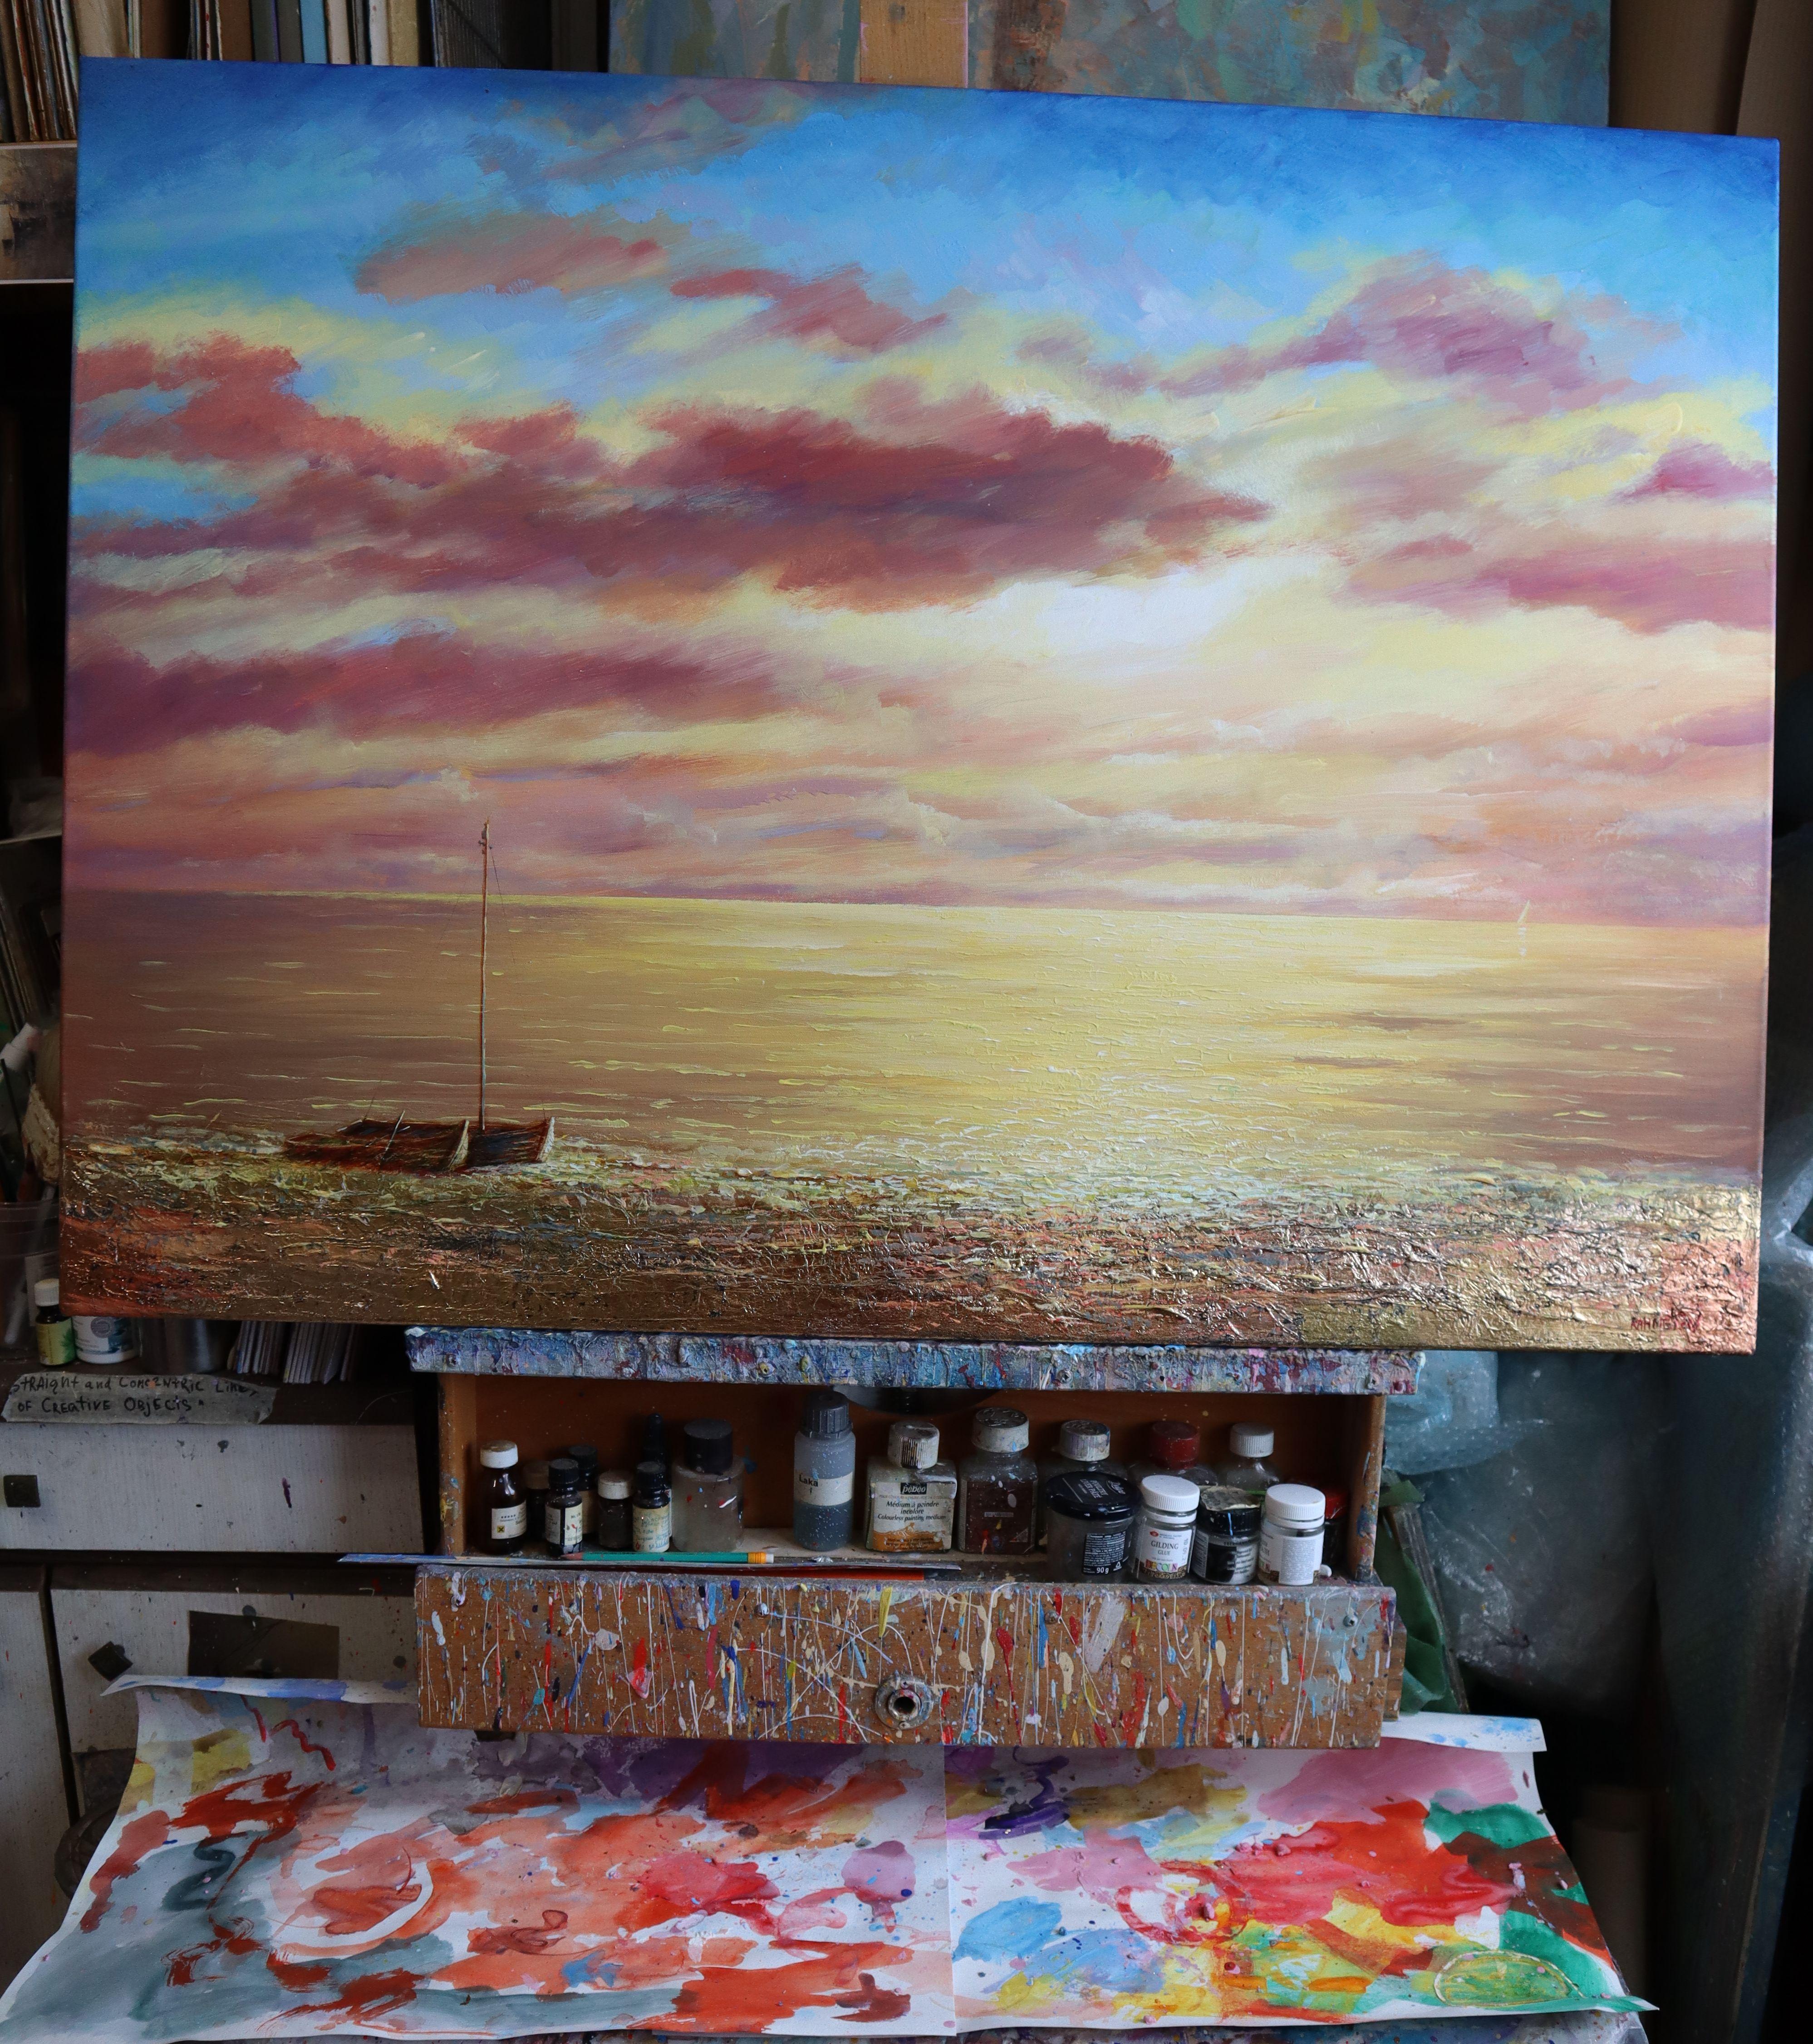 In this artwork, I melded the raw emotion of expressionism with the delicate beauty of impressionism, anchored by realism's clarity. Using acrylics and oils, I've painted a scene where the vibrant sky dances with the serene sea, reflecting life's